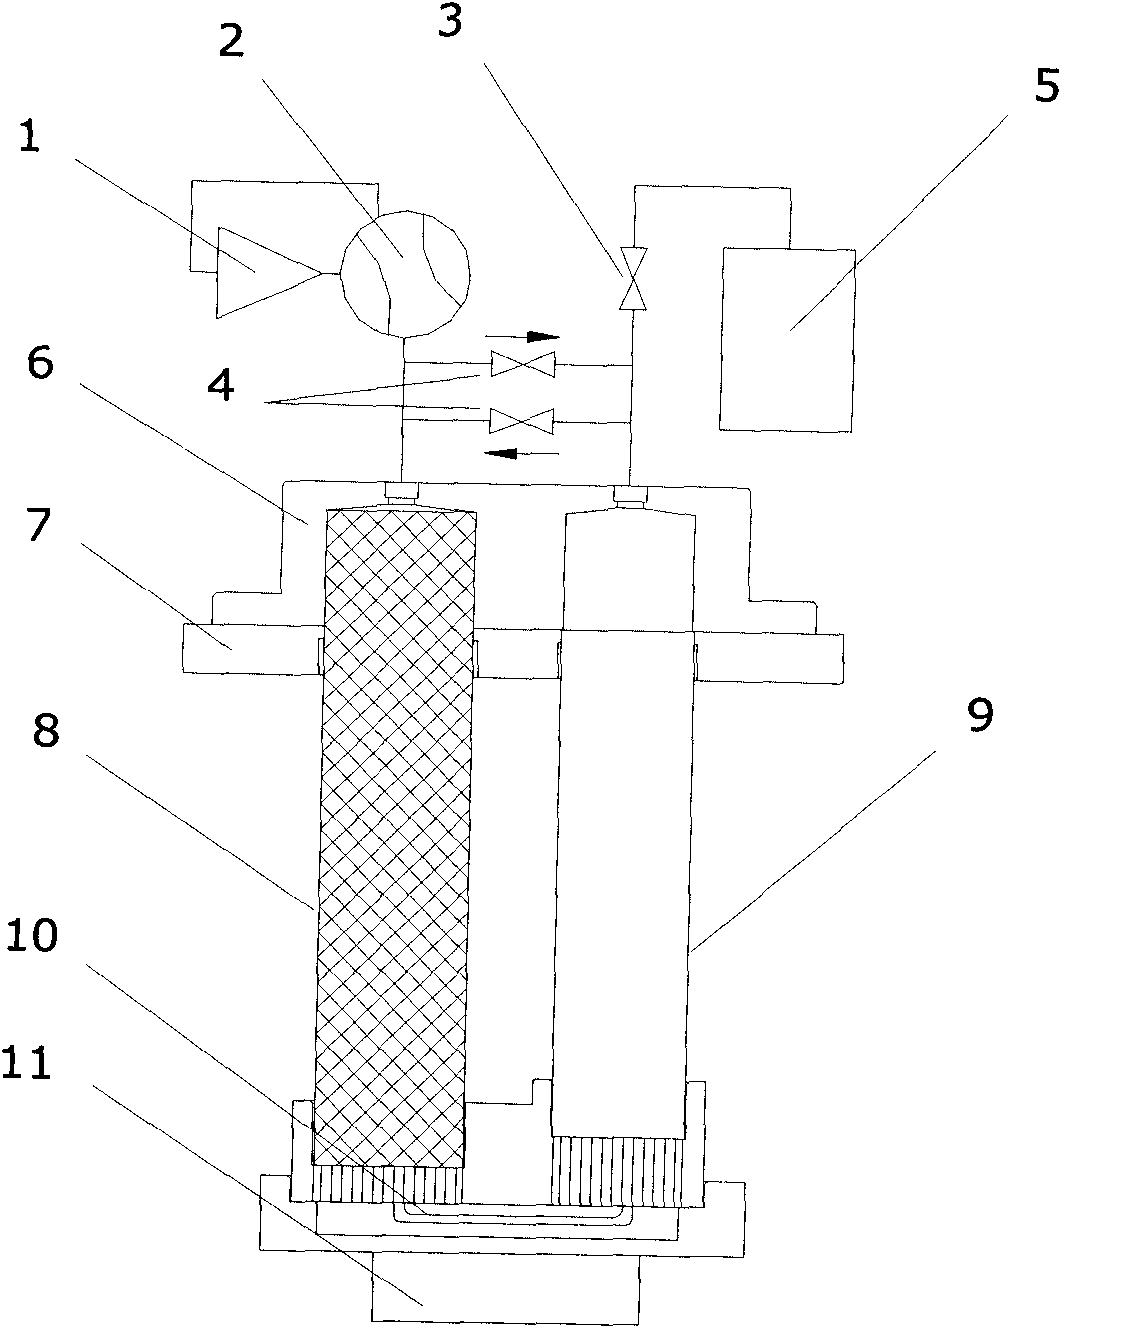 Object-oriented cooling device based on pulse tube refrigerator